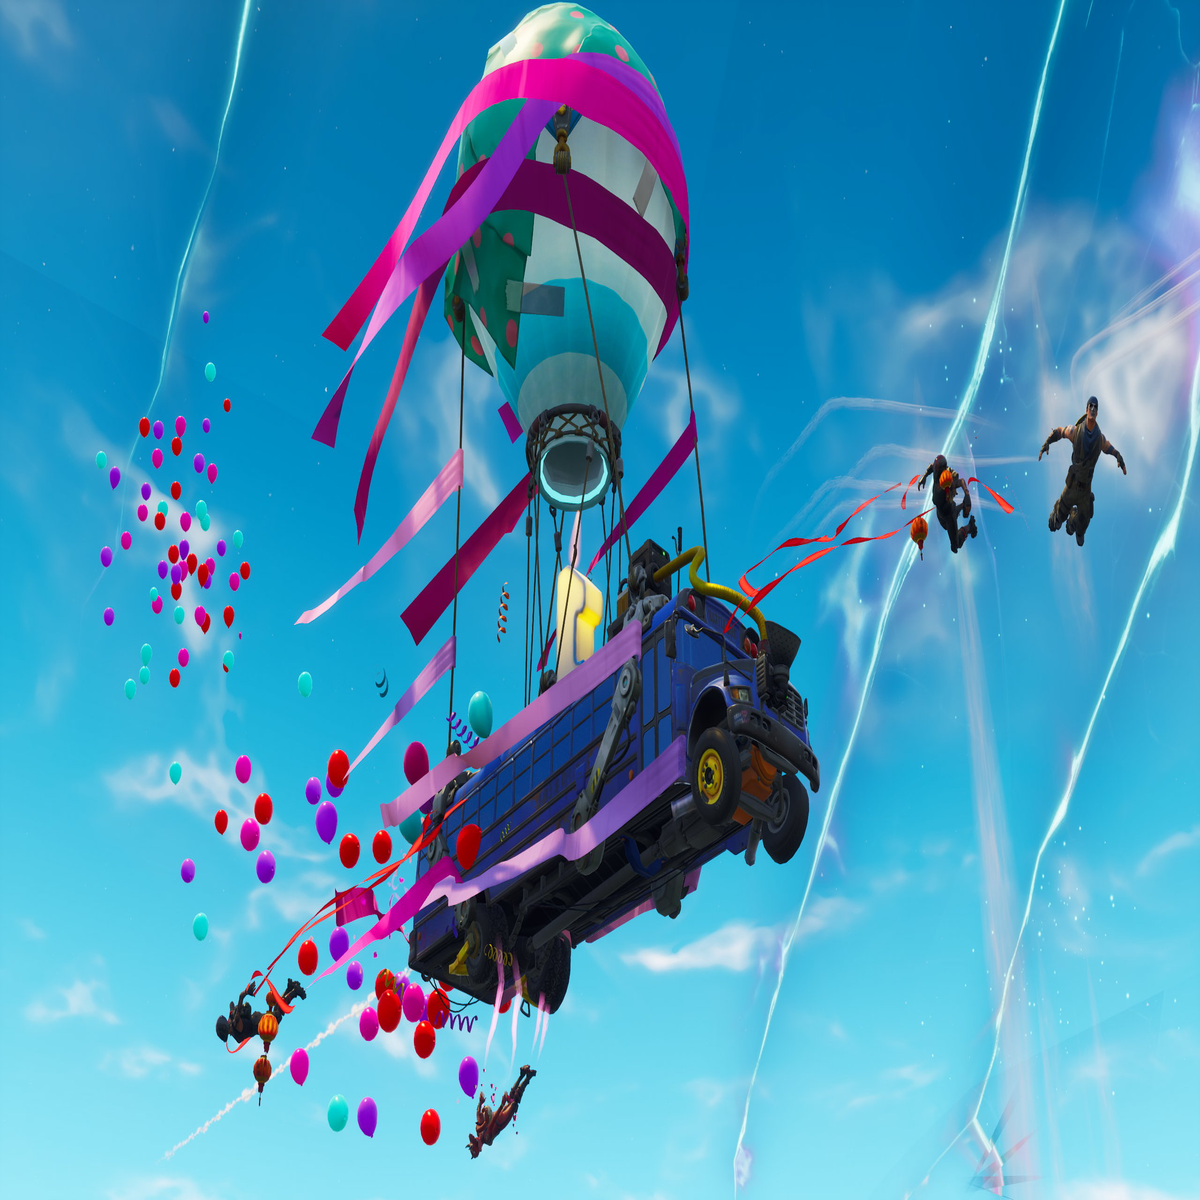 Epic opens Fortnite's cross-platform services for free to other devs